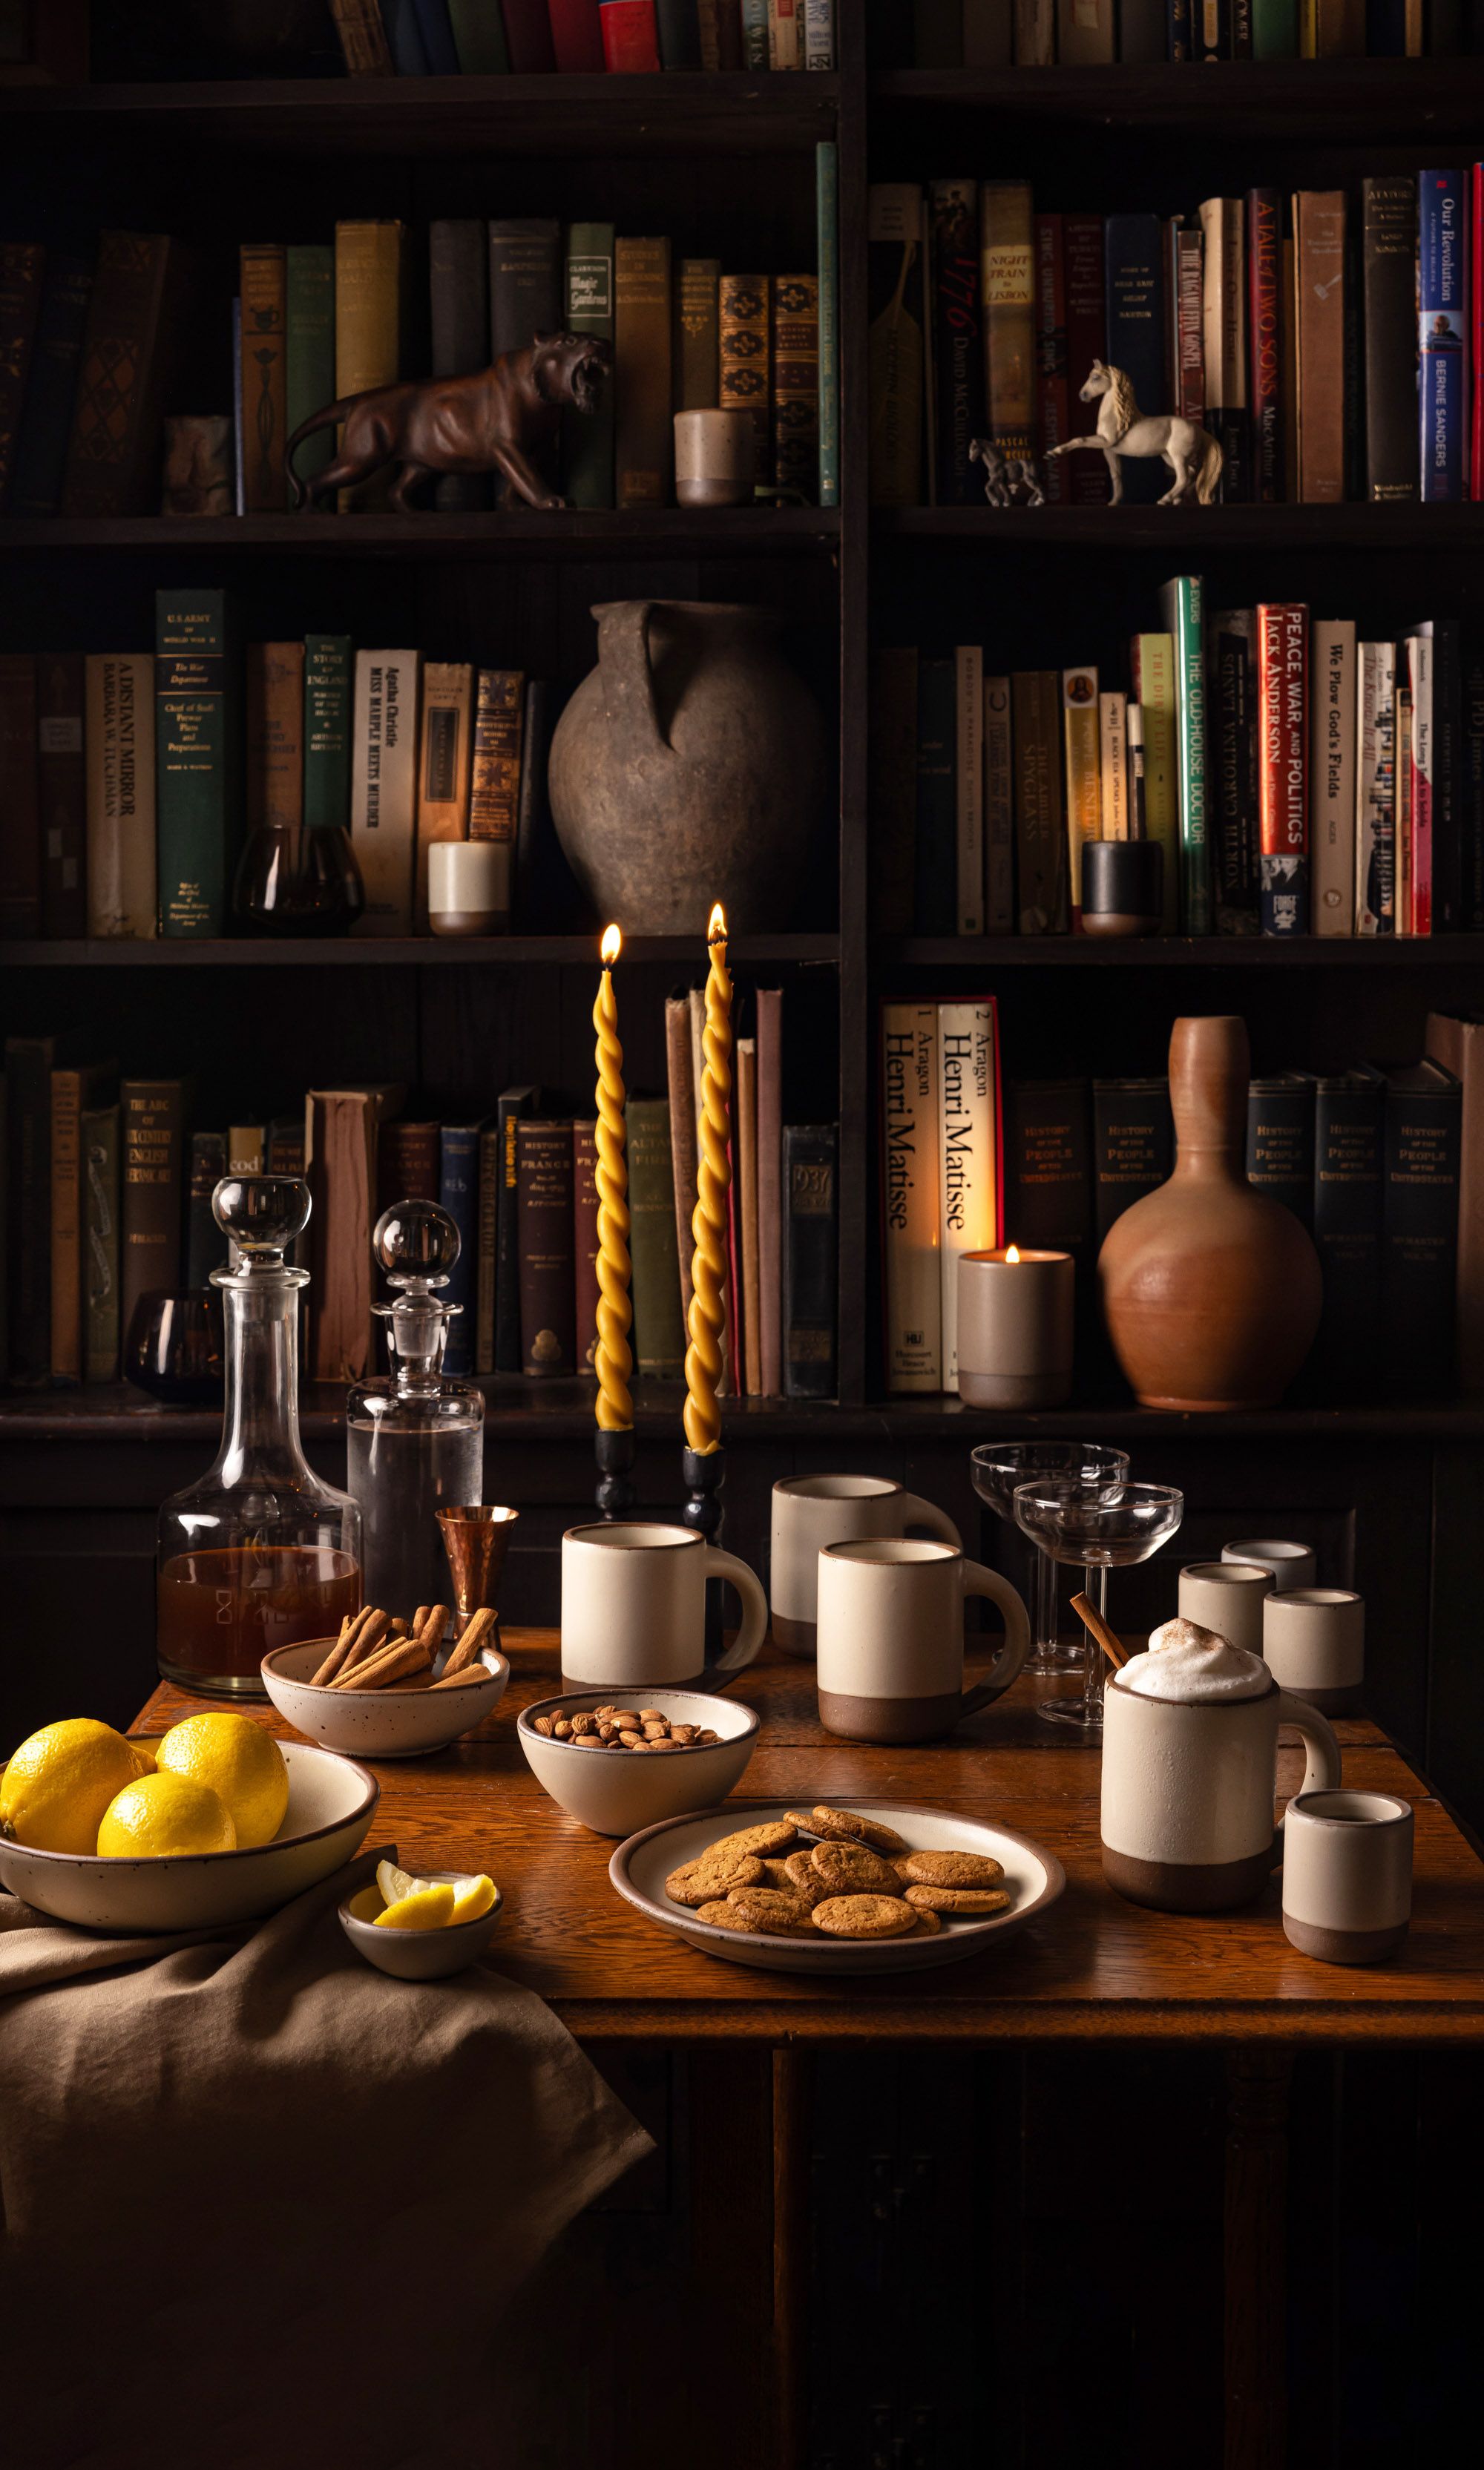 A moody library setting with a table filled with cream ceramic cups, plates, and bowls along with lit candles.